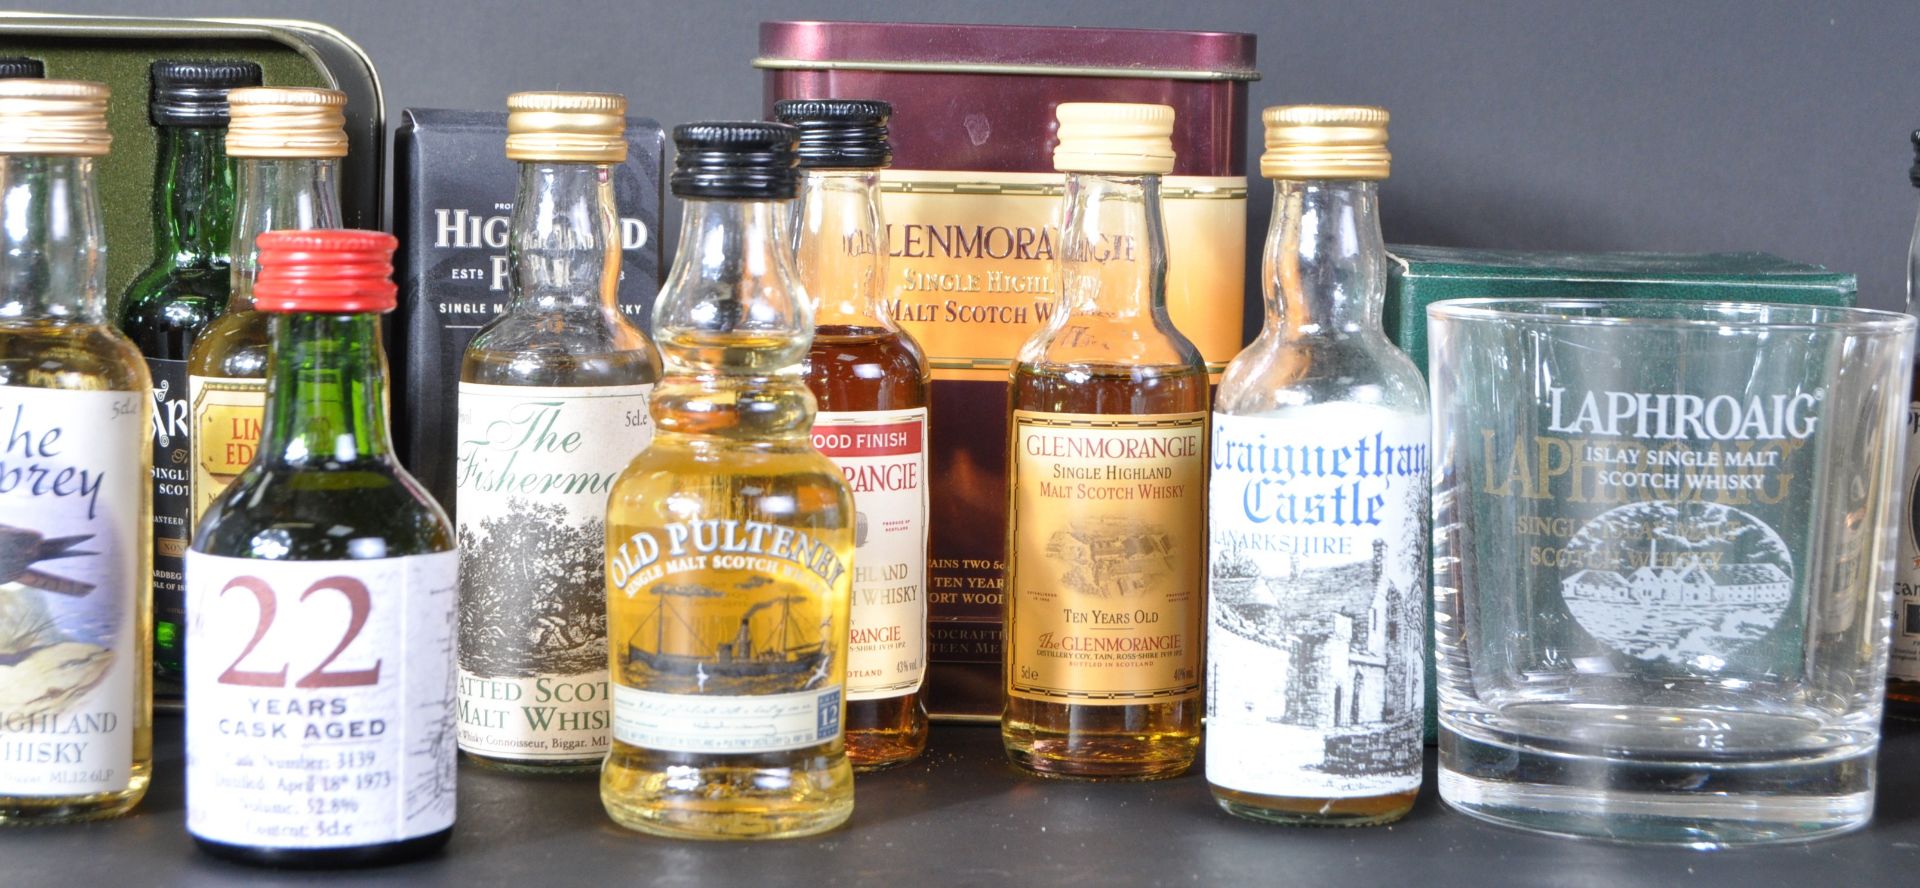 COLLECTION OF SINGLE MALT SCOTTISH WHISKY MINIATURES - Image 3 of 5